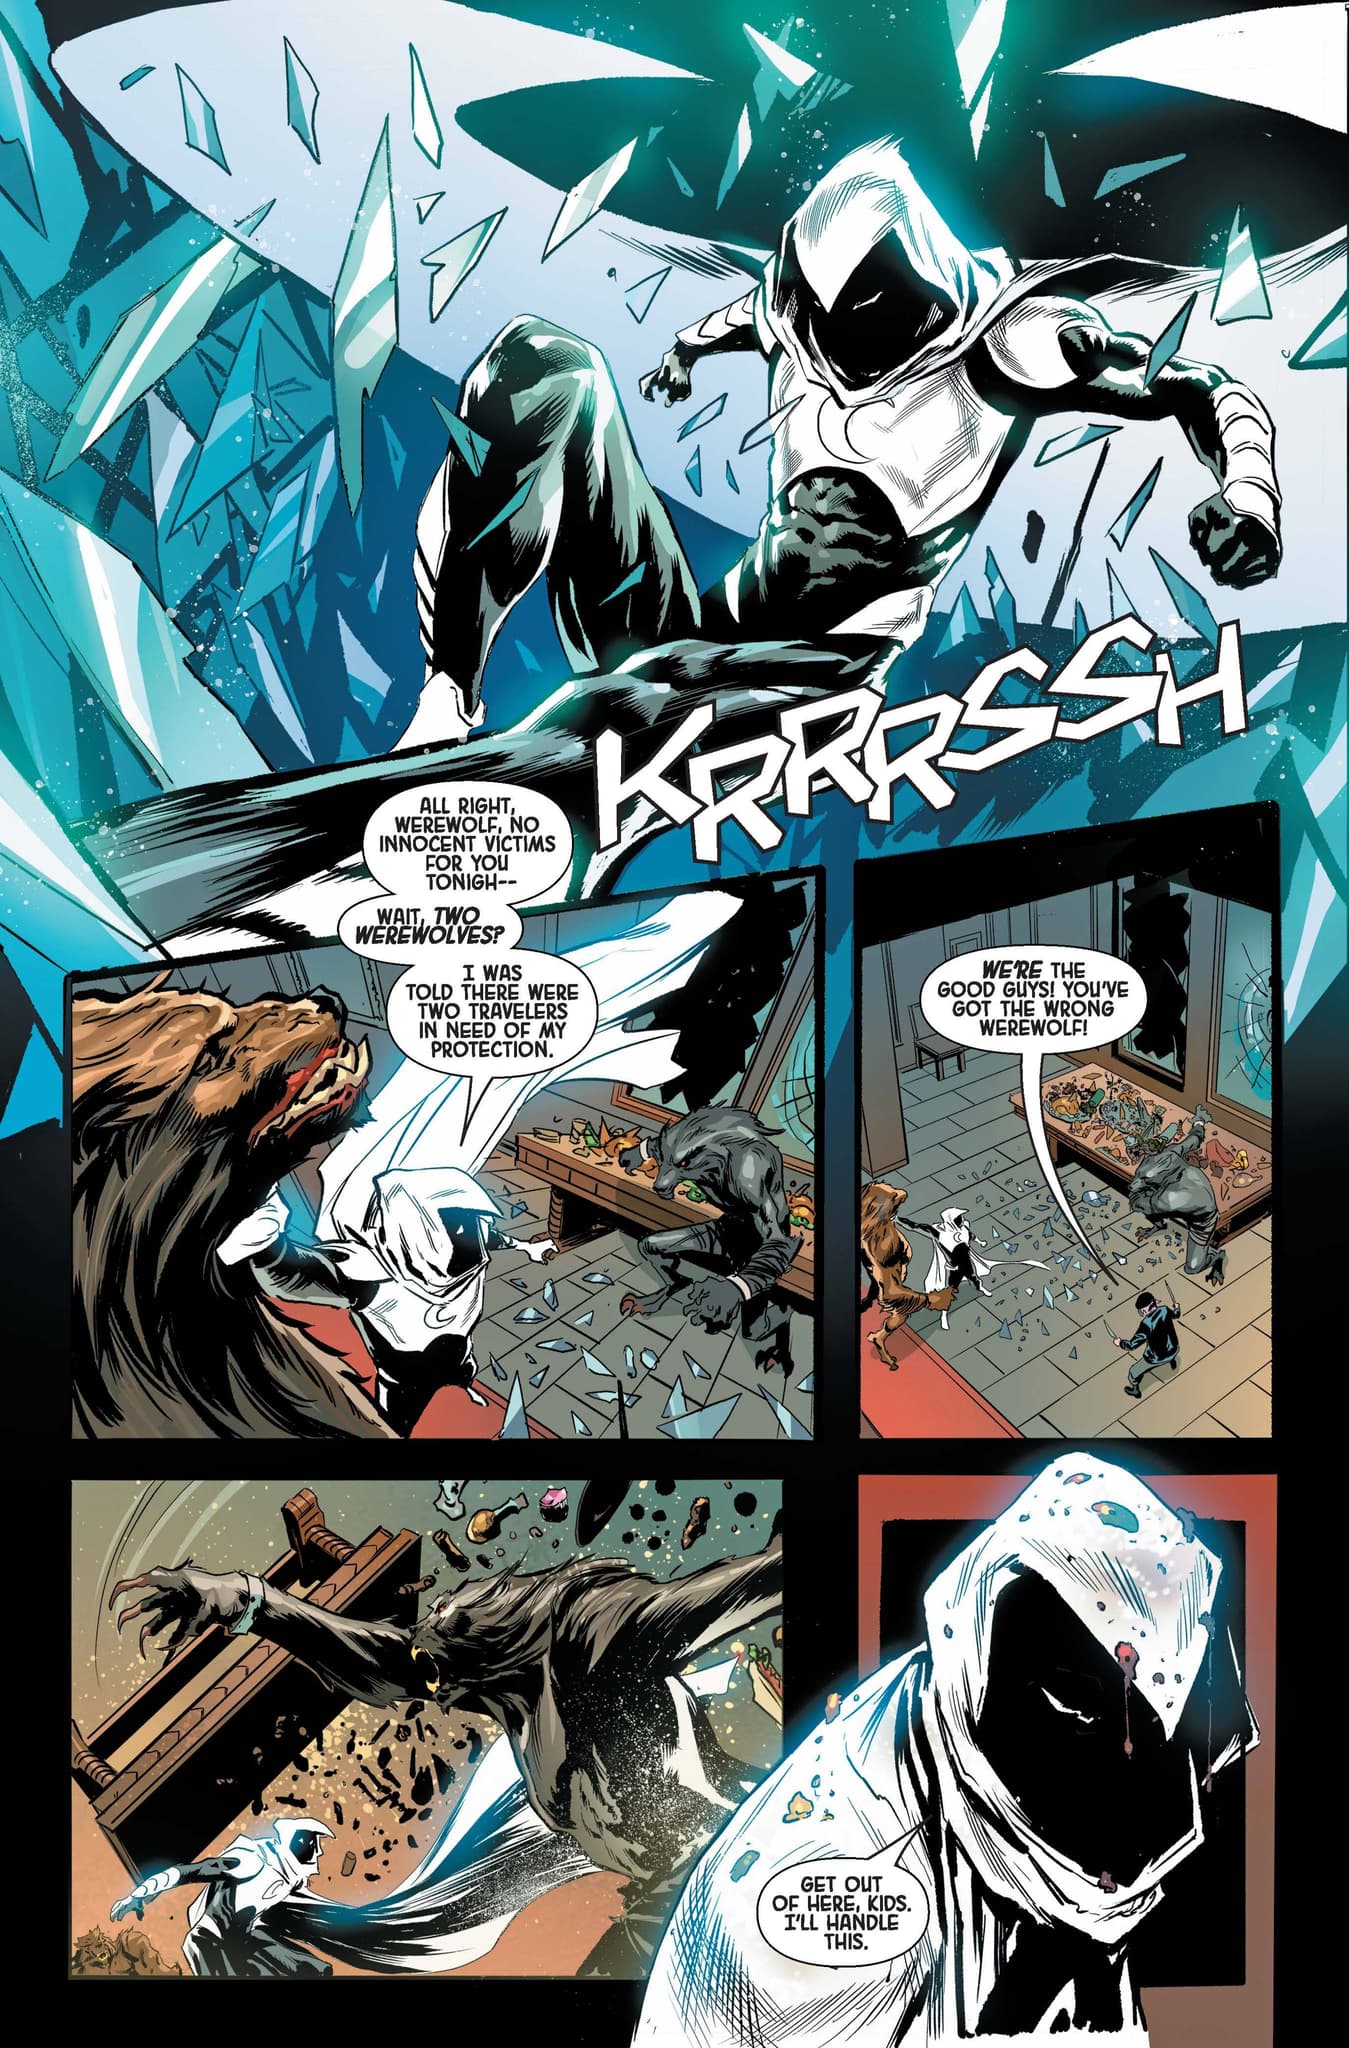 CRYPT OF SHADOWS (2022) #1: "Werewolf by Moon Knight" page by Rebecca Roanhorse and Geoff Shaw